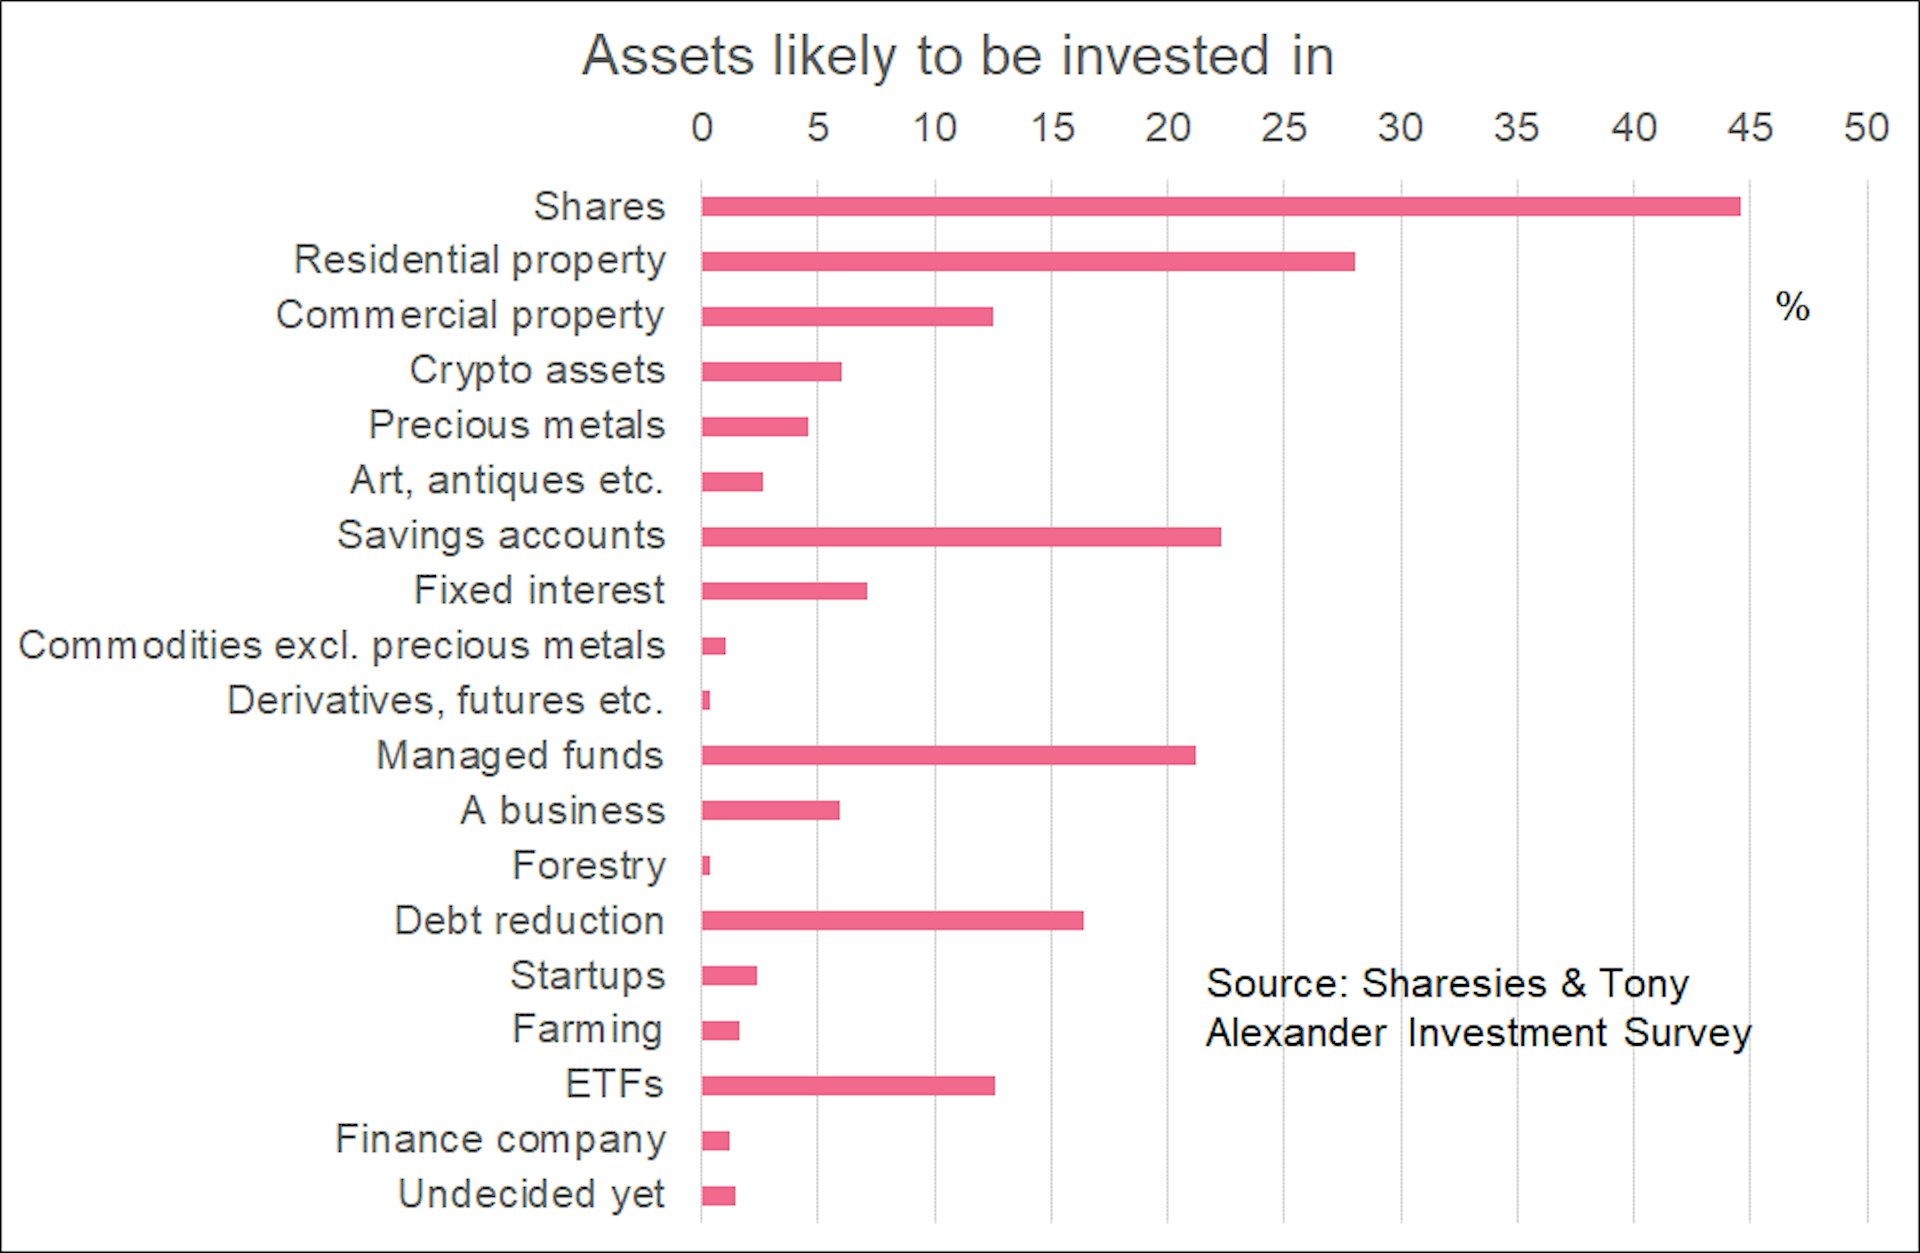 Bar graph showing just under 45% of respondents are likely to invest in shares, with residential property the second most likely investment at 27%. Savings accounts are sitting at 22% of respondents, up from 15% of respondents in August 2022. 